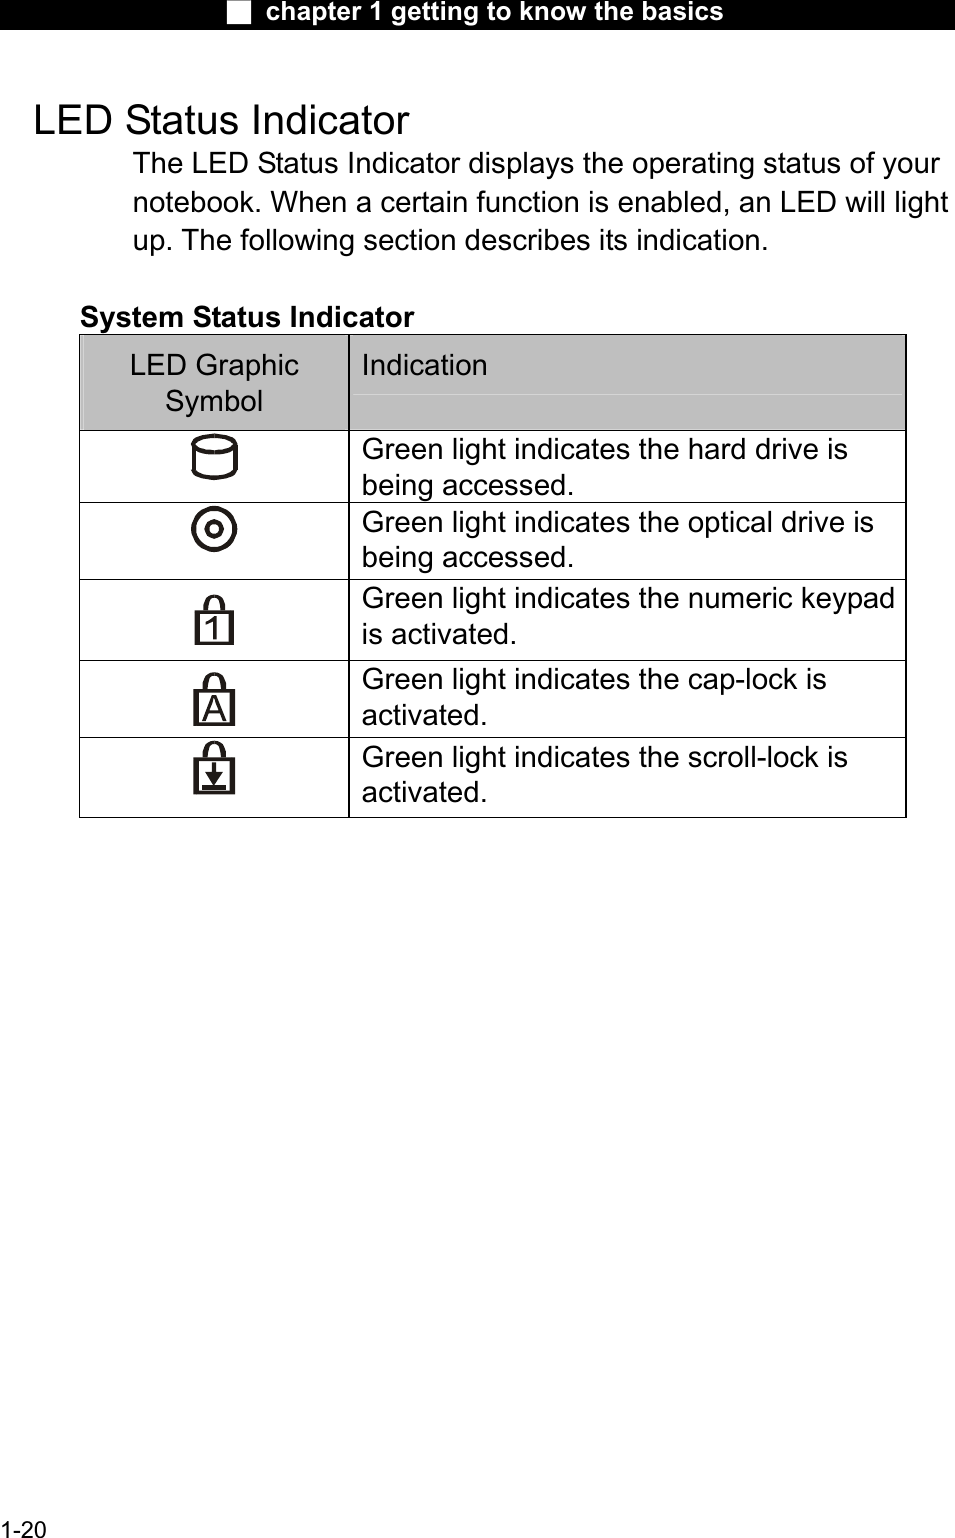 Ϯ chapter 1 getting to know the basicsLED Status Indicator The LED Status Indicator displays the operating status of your notebook. When a certain function is enabled, an LED will light up. The following section describes its indication.System Status IndicatorLED GraphicSymbolIndicationGreen light indicates the hard drive is being accessed.Green light indicates the optical drive isbeing accessed.Green light indicates the numeric keypadis activated.Green light indicates the cap-lock is activated.Green light indicates the scroll-lock is activated.1-20